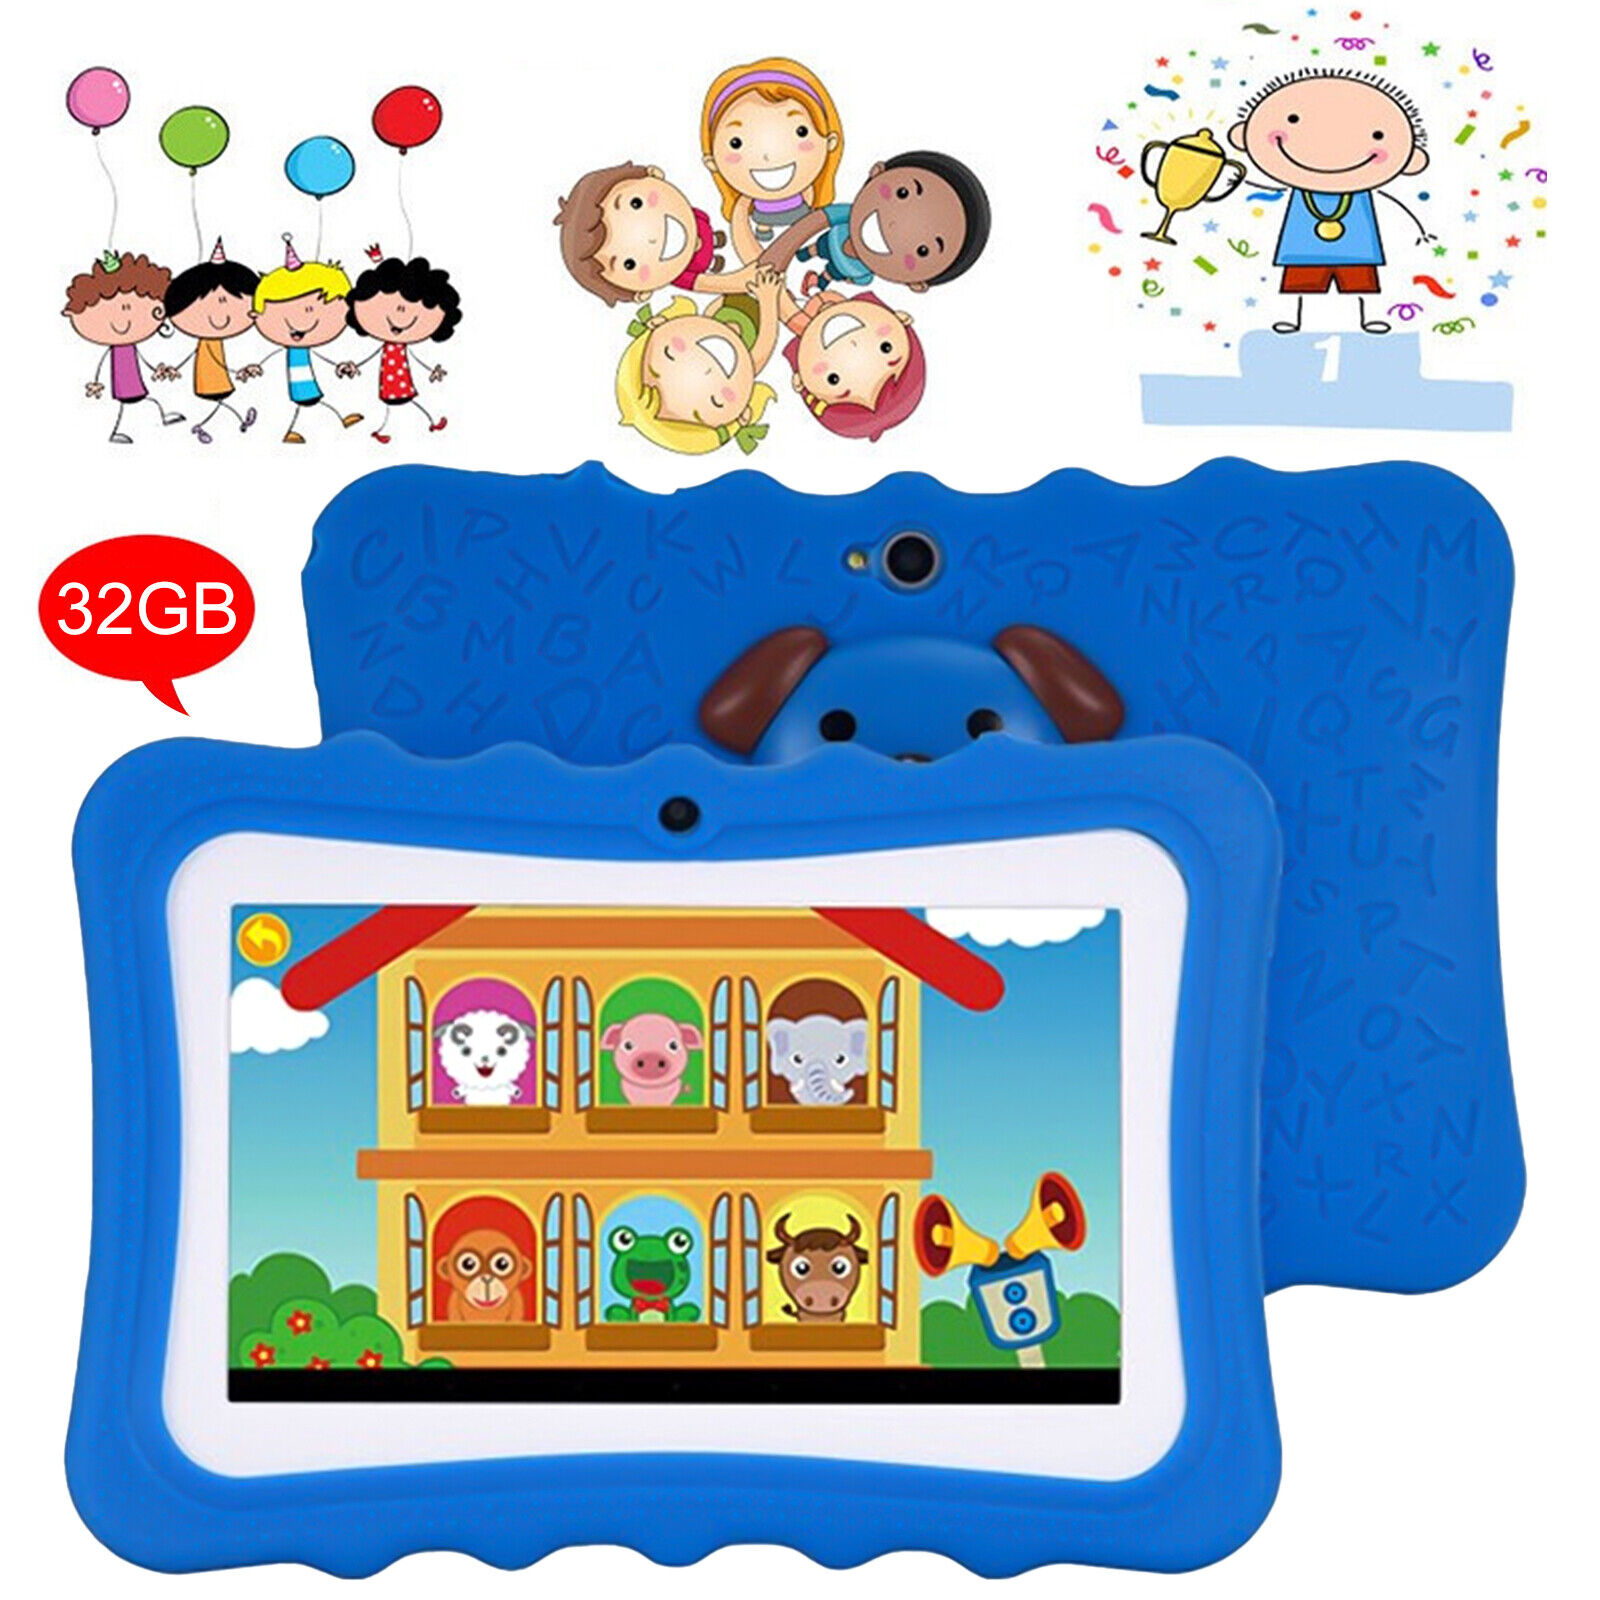 Educational Learning Toys Tablet for Kids Toddlers Age 2 3 4 5 6 7 Years Old